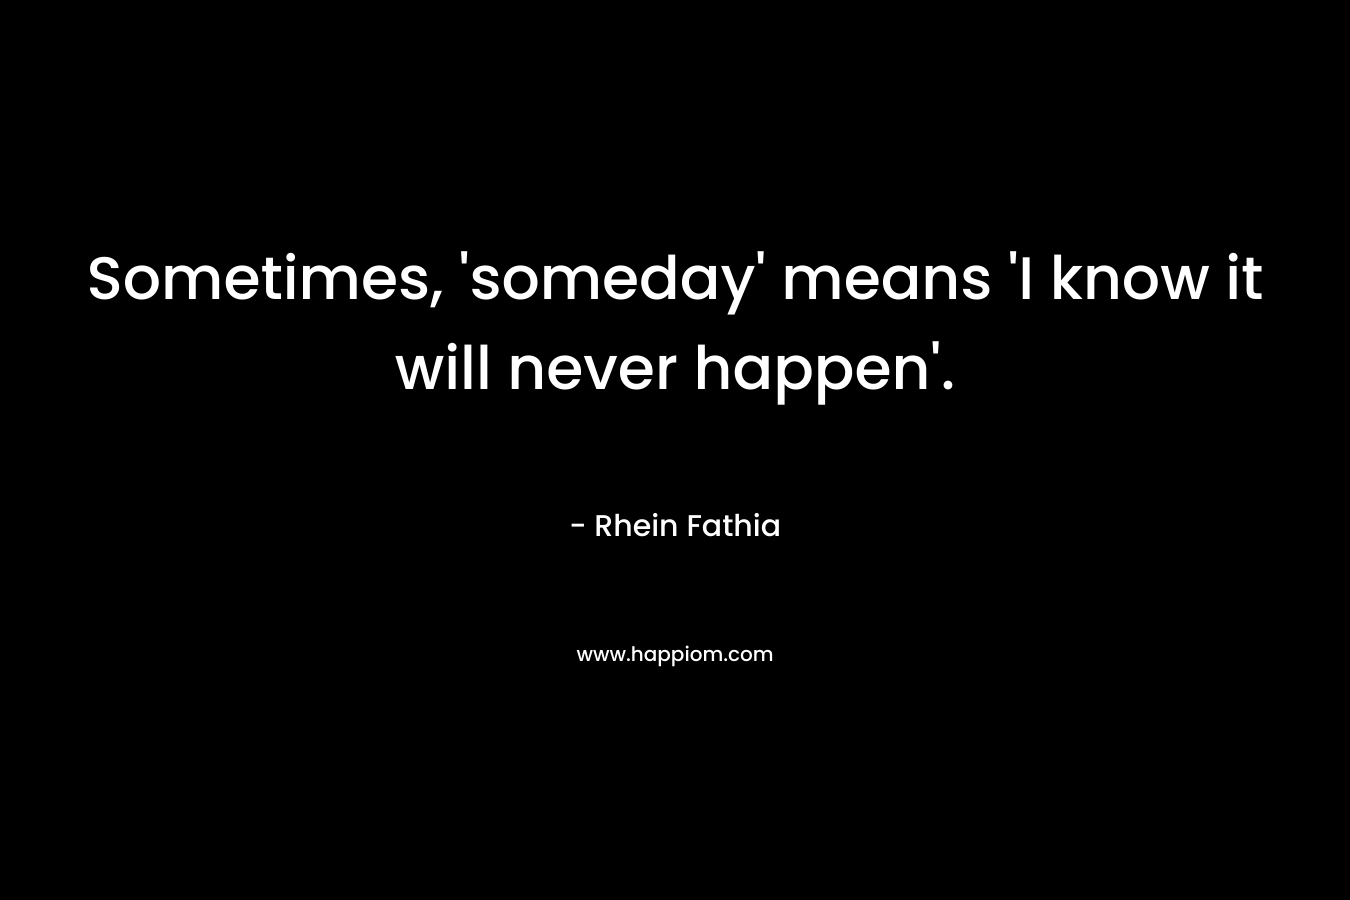 Sometimes, ‘someday’ means ‘I know it will never happen’. – Rhein Fathia